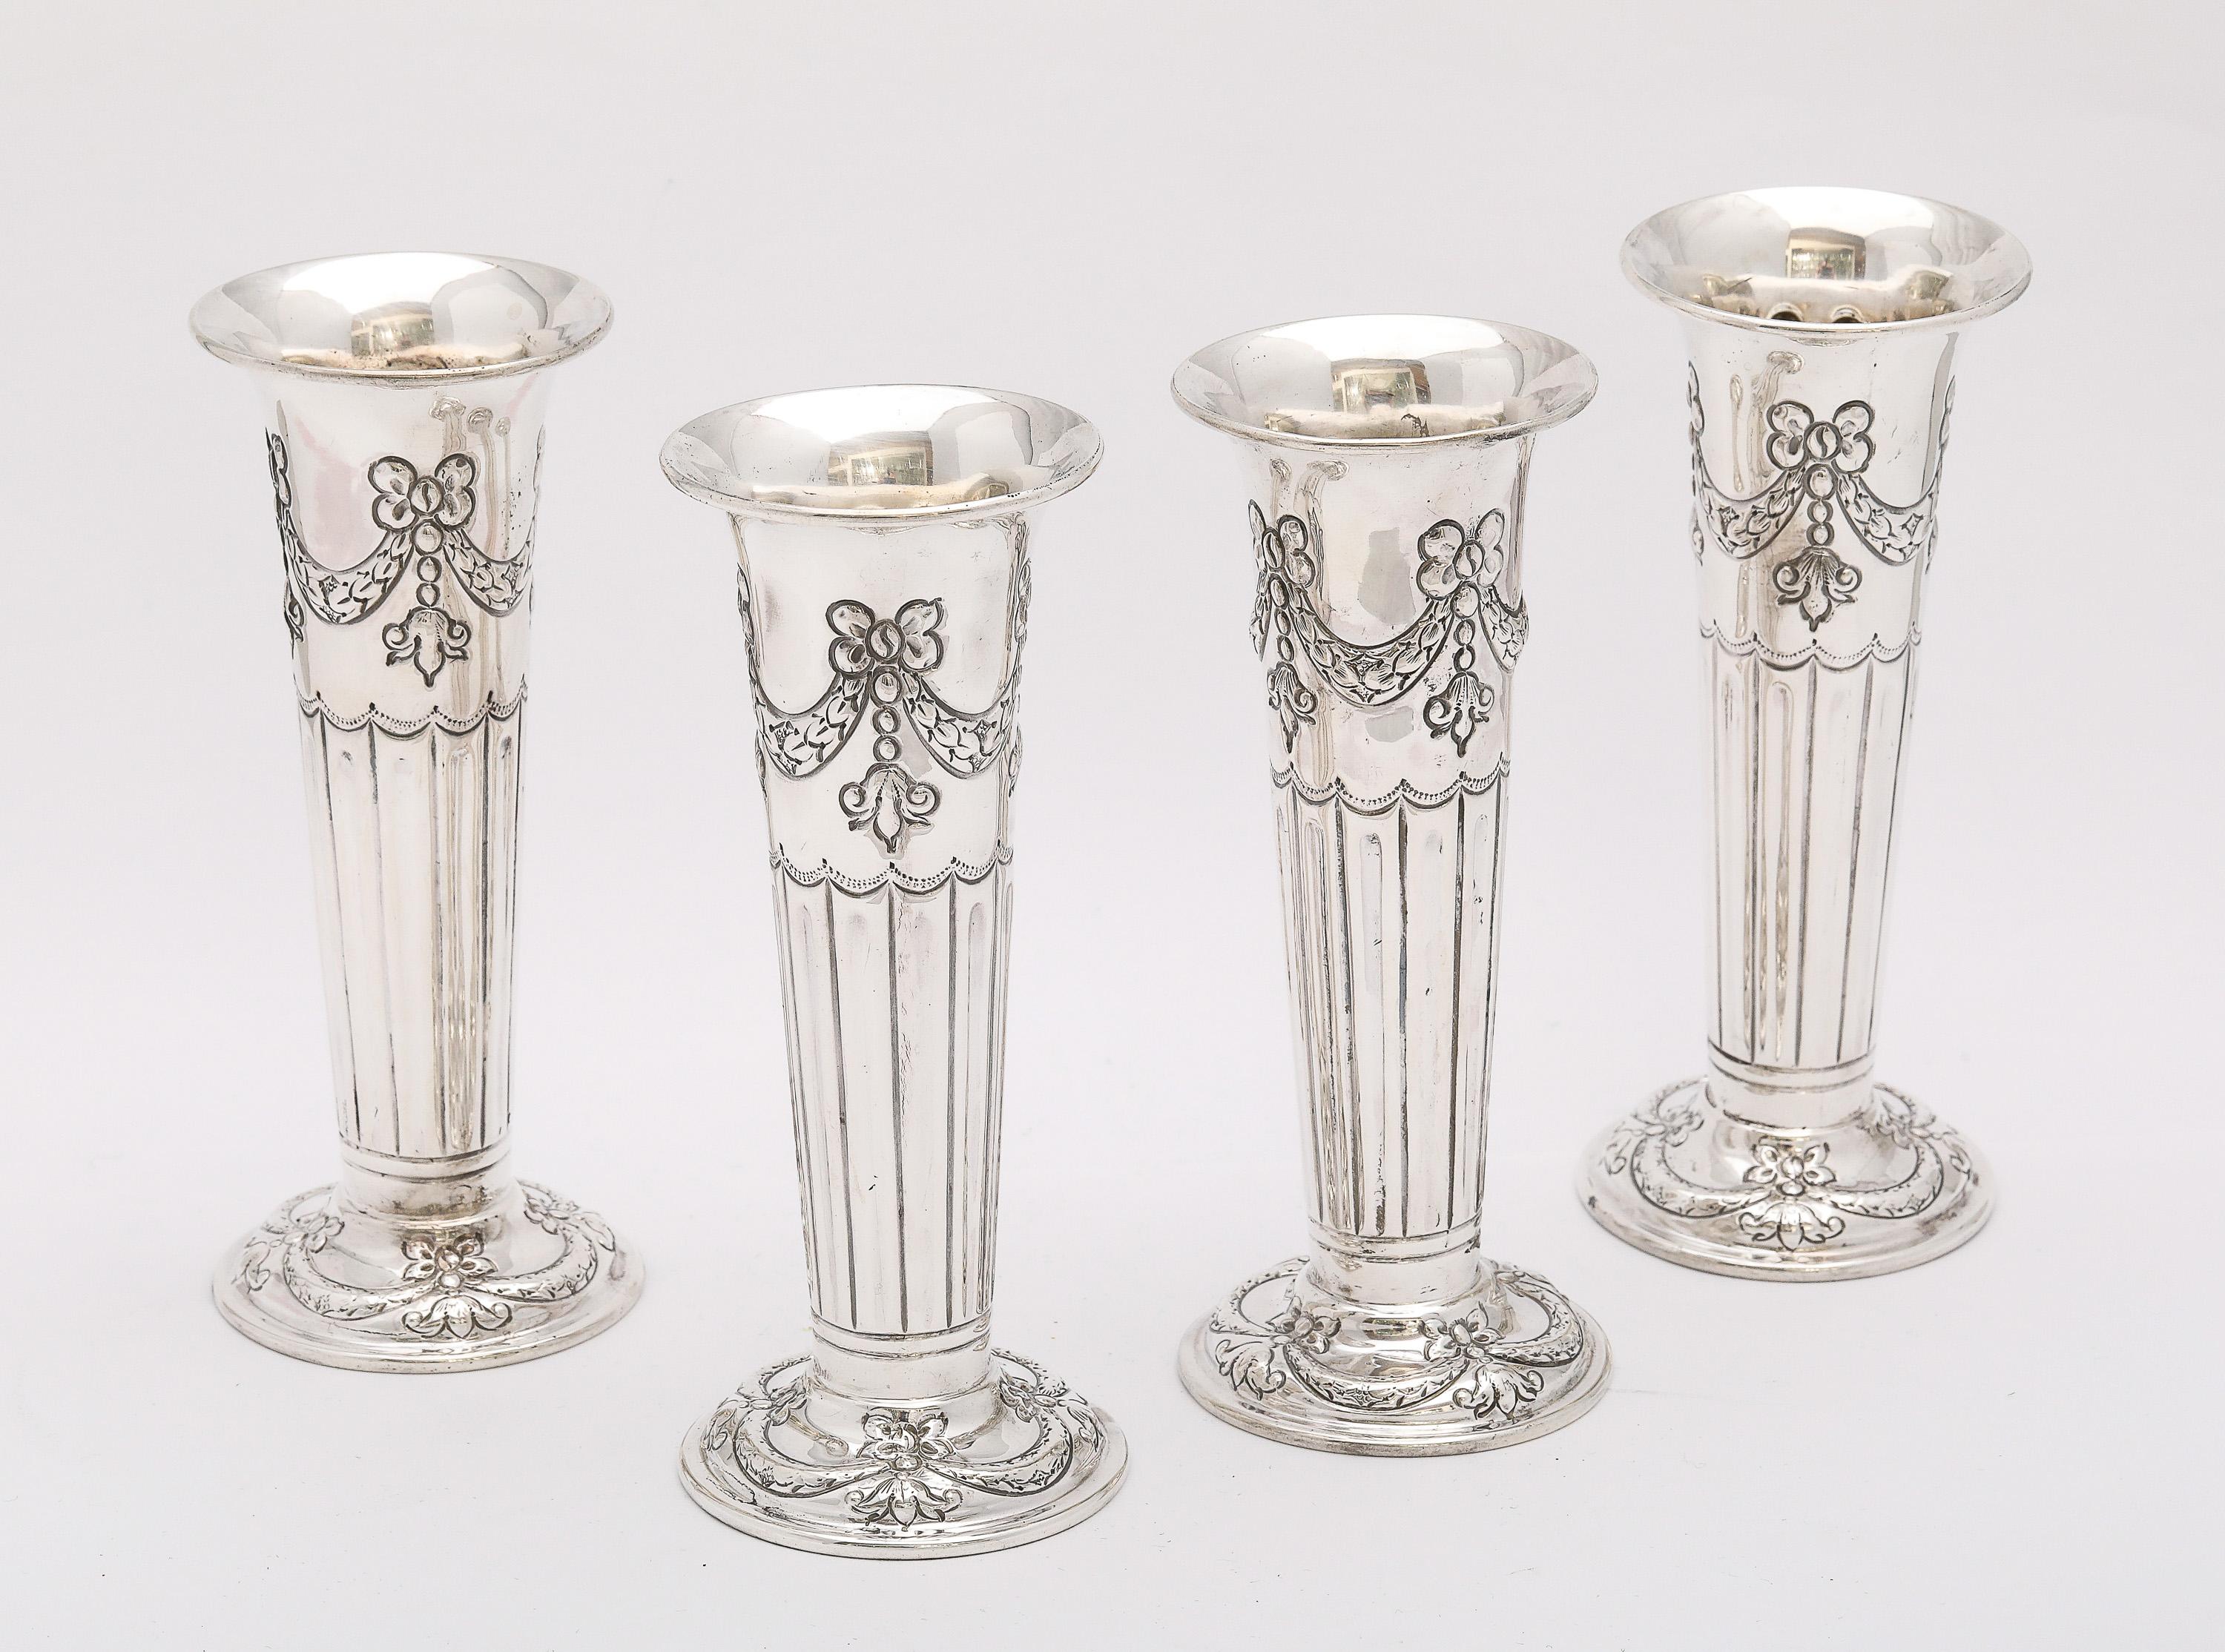 Rare Victorian Period Set of Four Matching Sterling Silver Bud Vases By Atkin In Good Condition For Sale In New York, NY